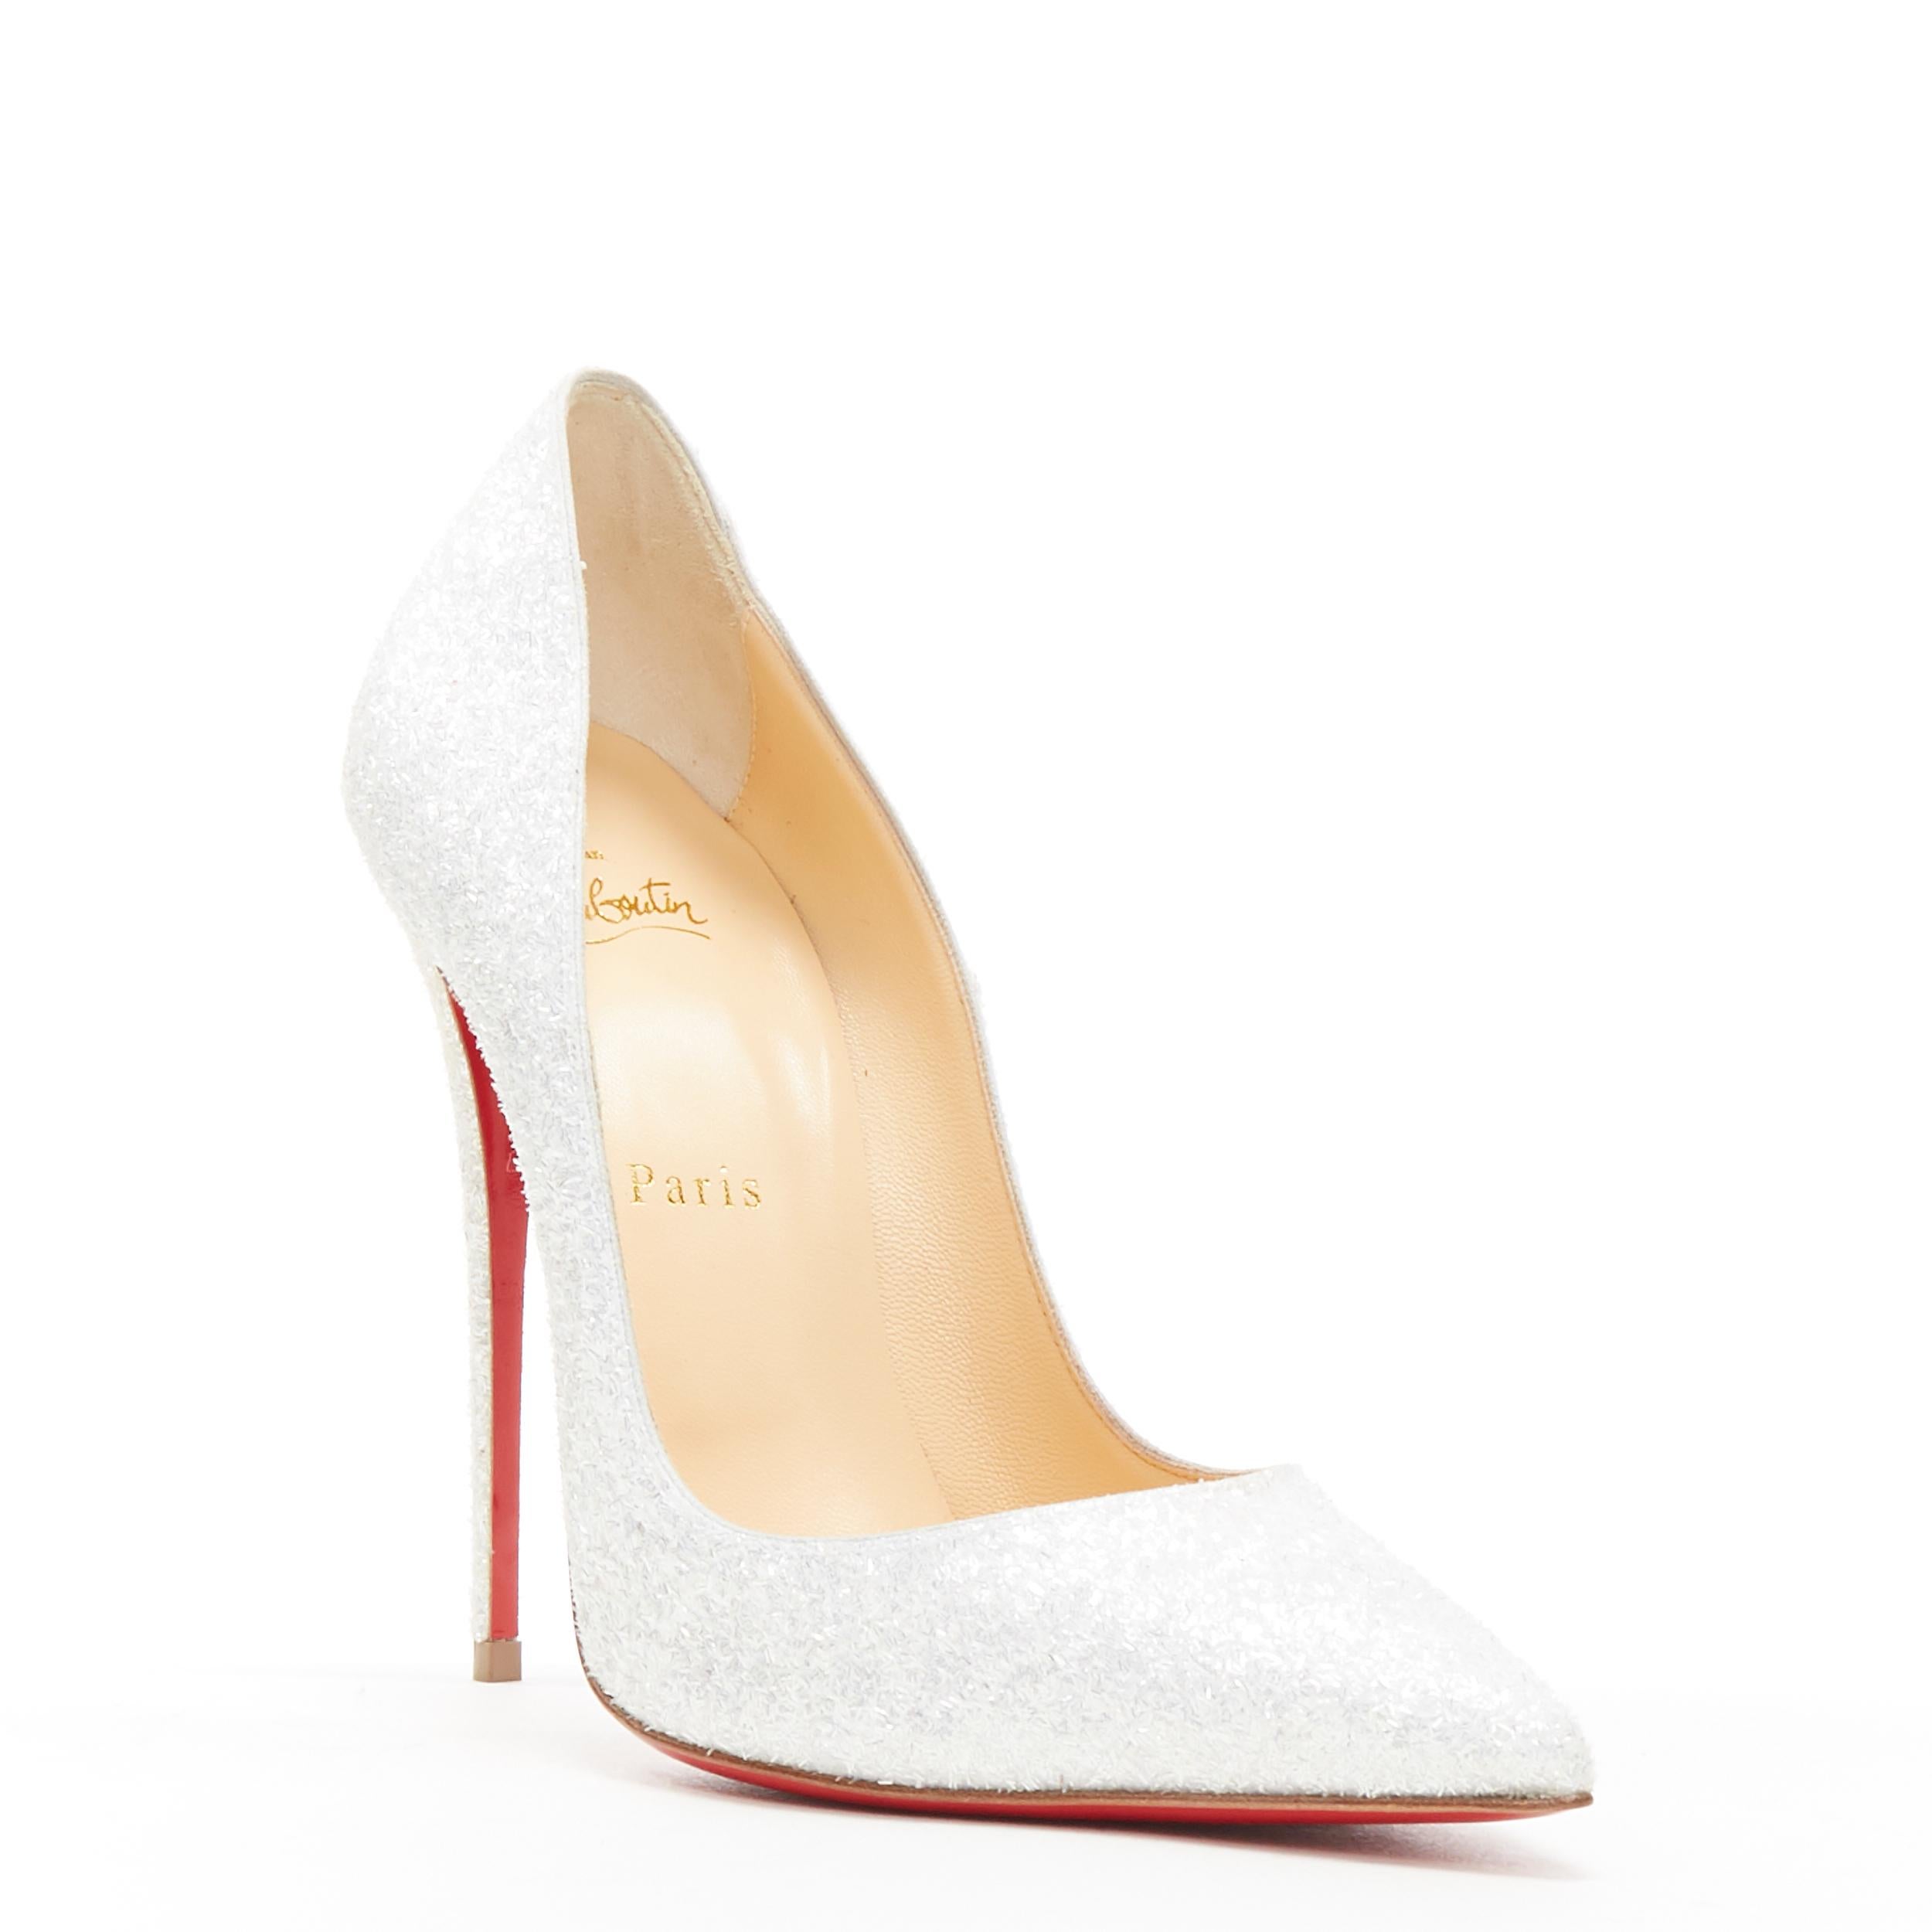 new CHRISTIAN LOUBOUTIN So Kate 120 white glitter pointy bridal pigalle EU37
Brand: Christian Louboutin
Designer: Christian Louboutin
Model Name / Style: So Kate 120
Material: Leather
Color: White
Pattern: Solid
Extra Detail: Style code: 1190030